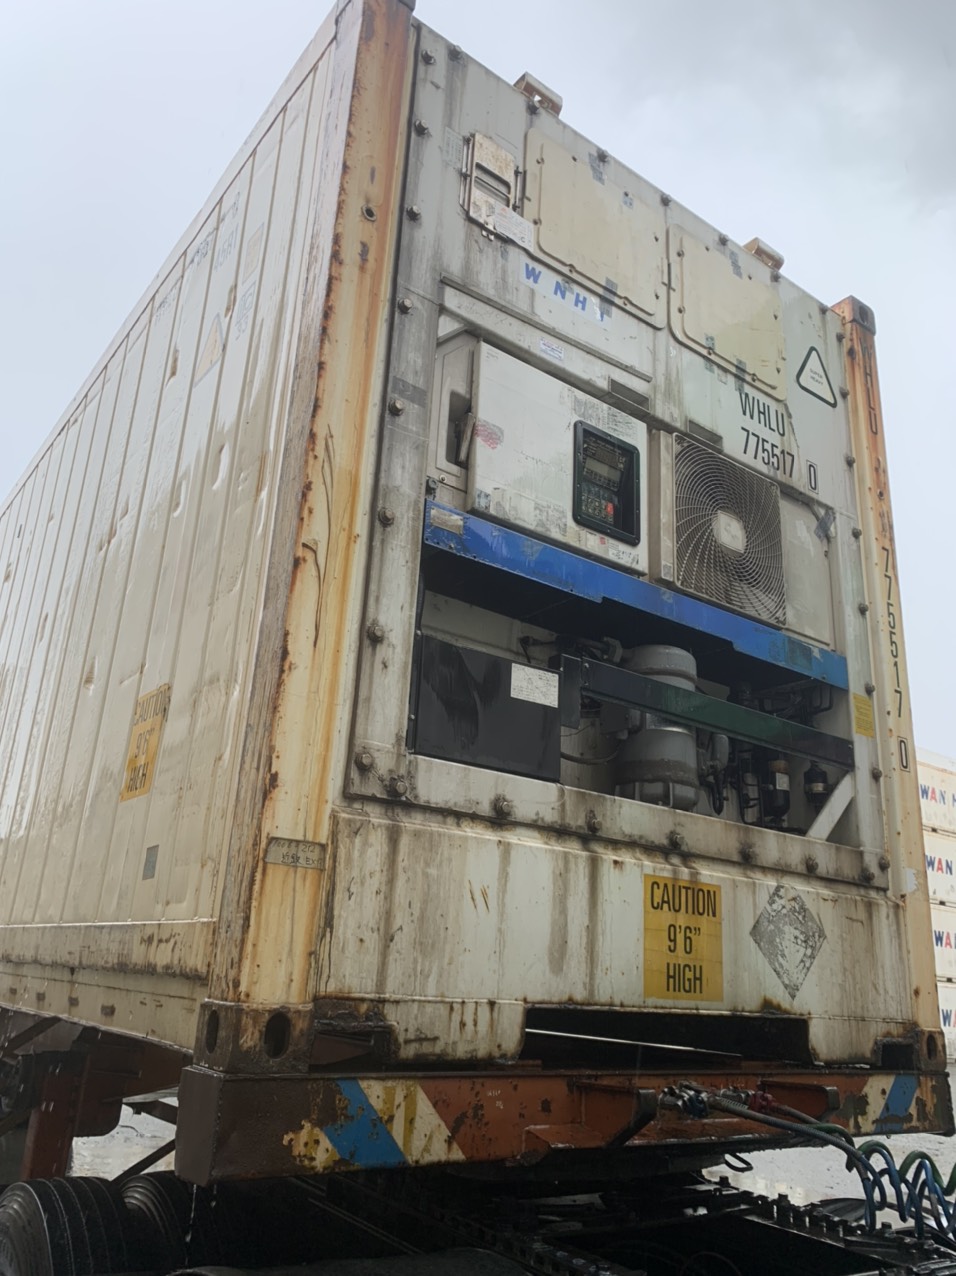 CONTAINER LẠNH 40RH WHLU7755170